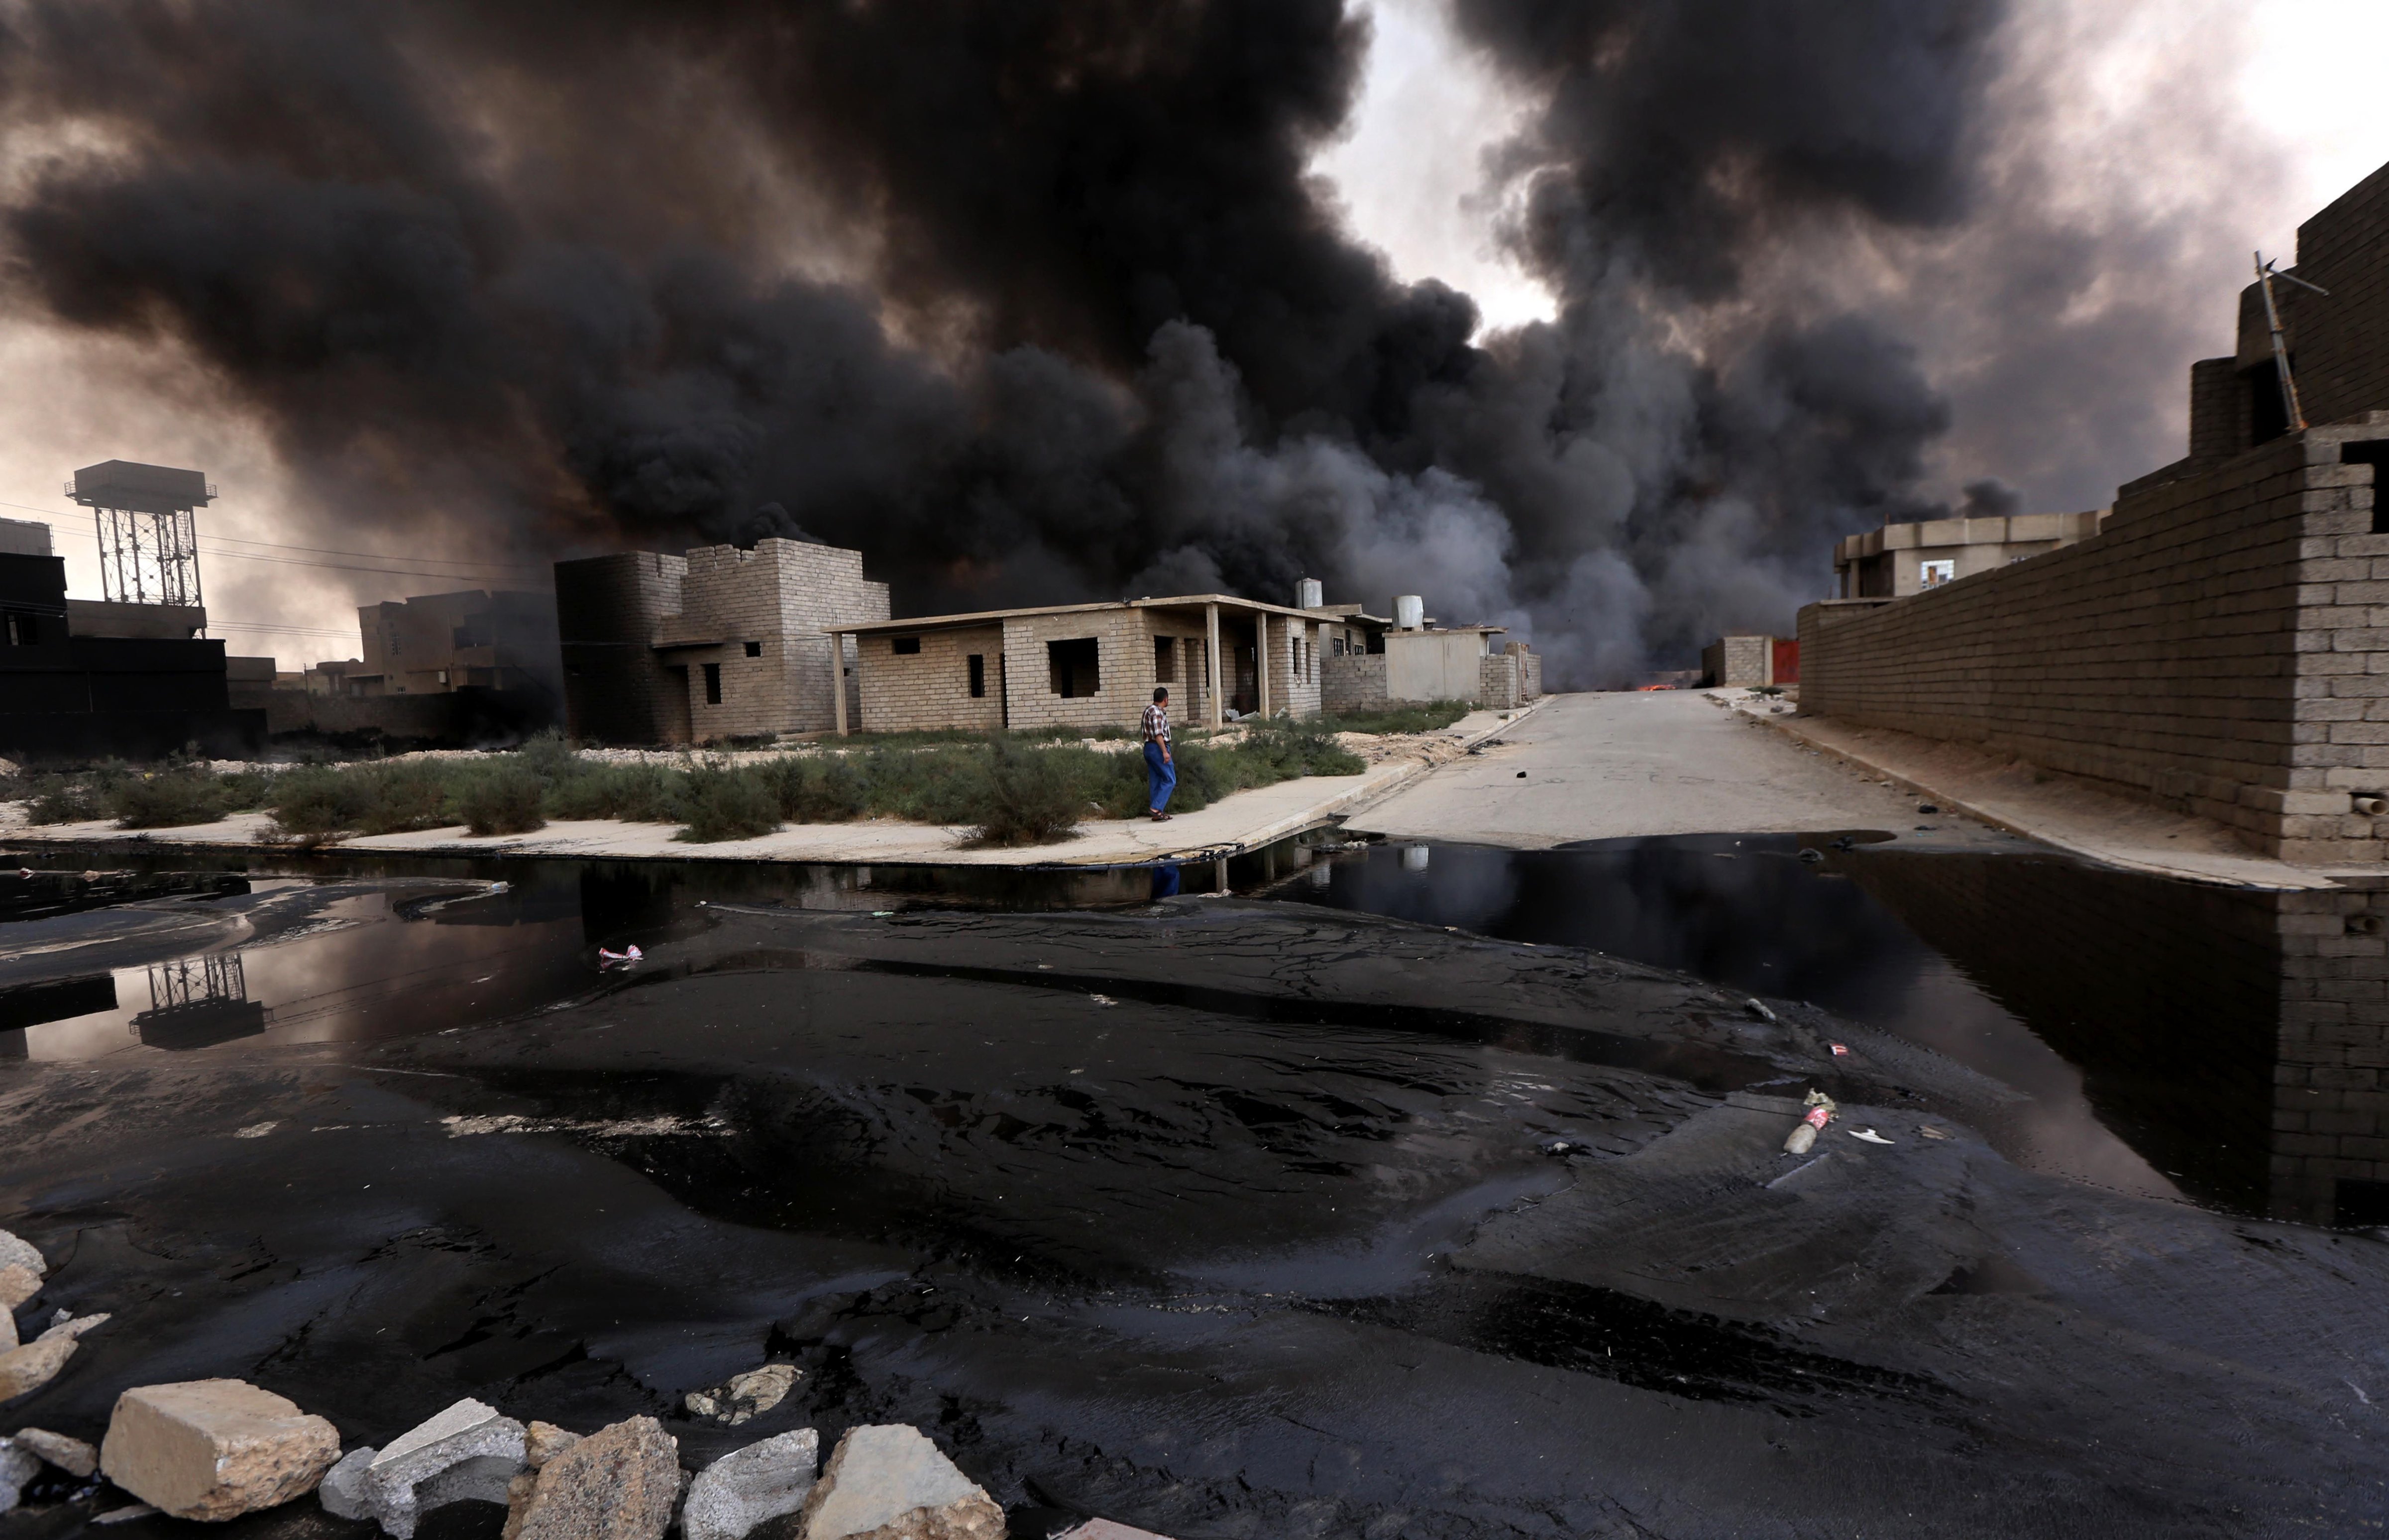 Smoke billows from oil wells, set ablaze by Islamic State militants before fleeing the Iraqi region of Qayyarah, on August 30, 2016. (Safin Hamed—AFP/Getty Images)